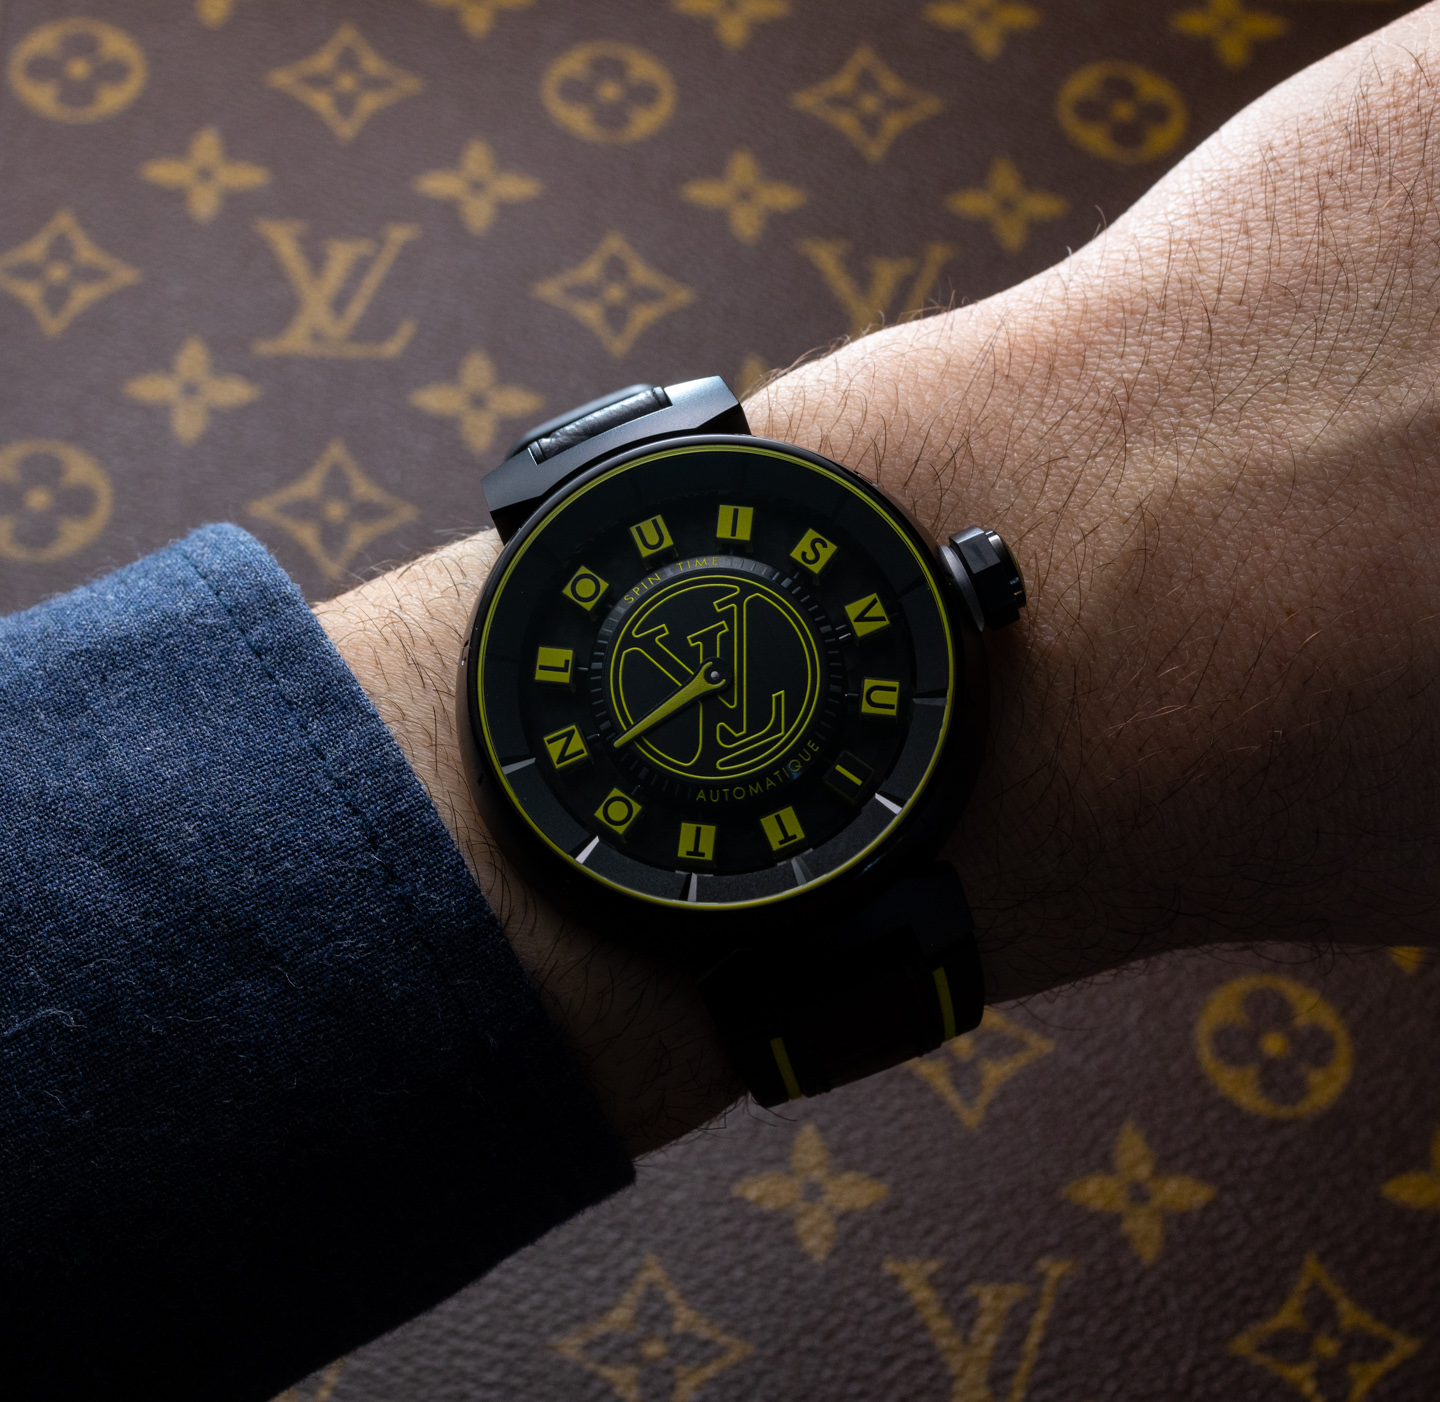 Watch Louis Vuitton Tambour Spin Time Joaillerie